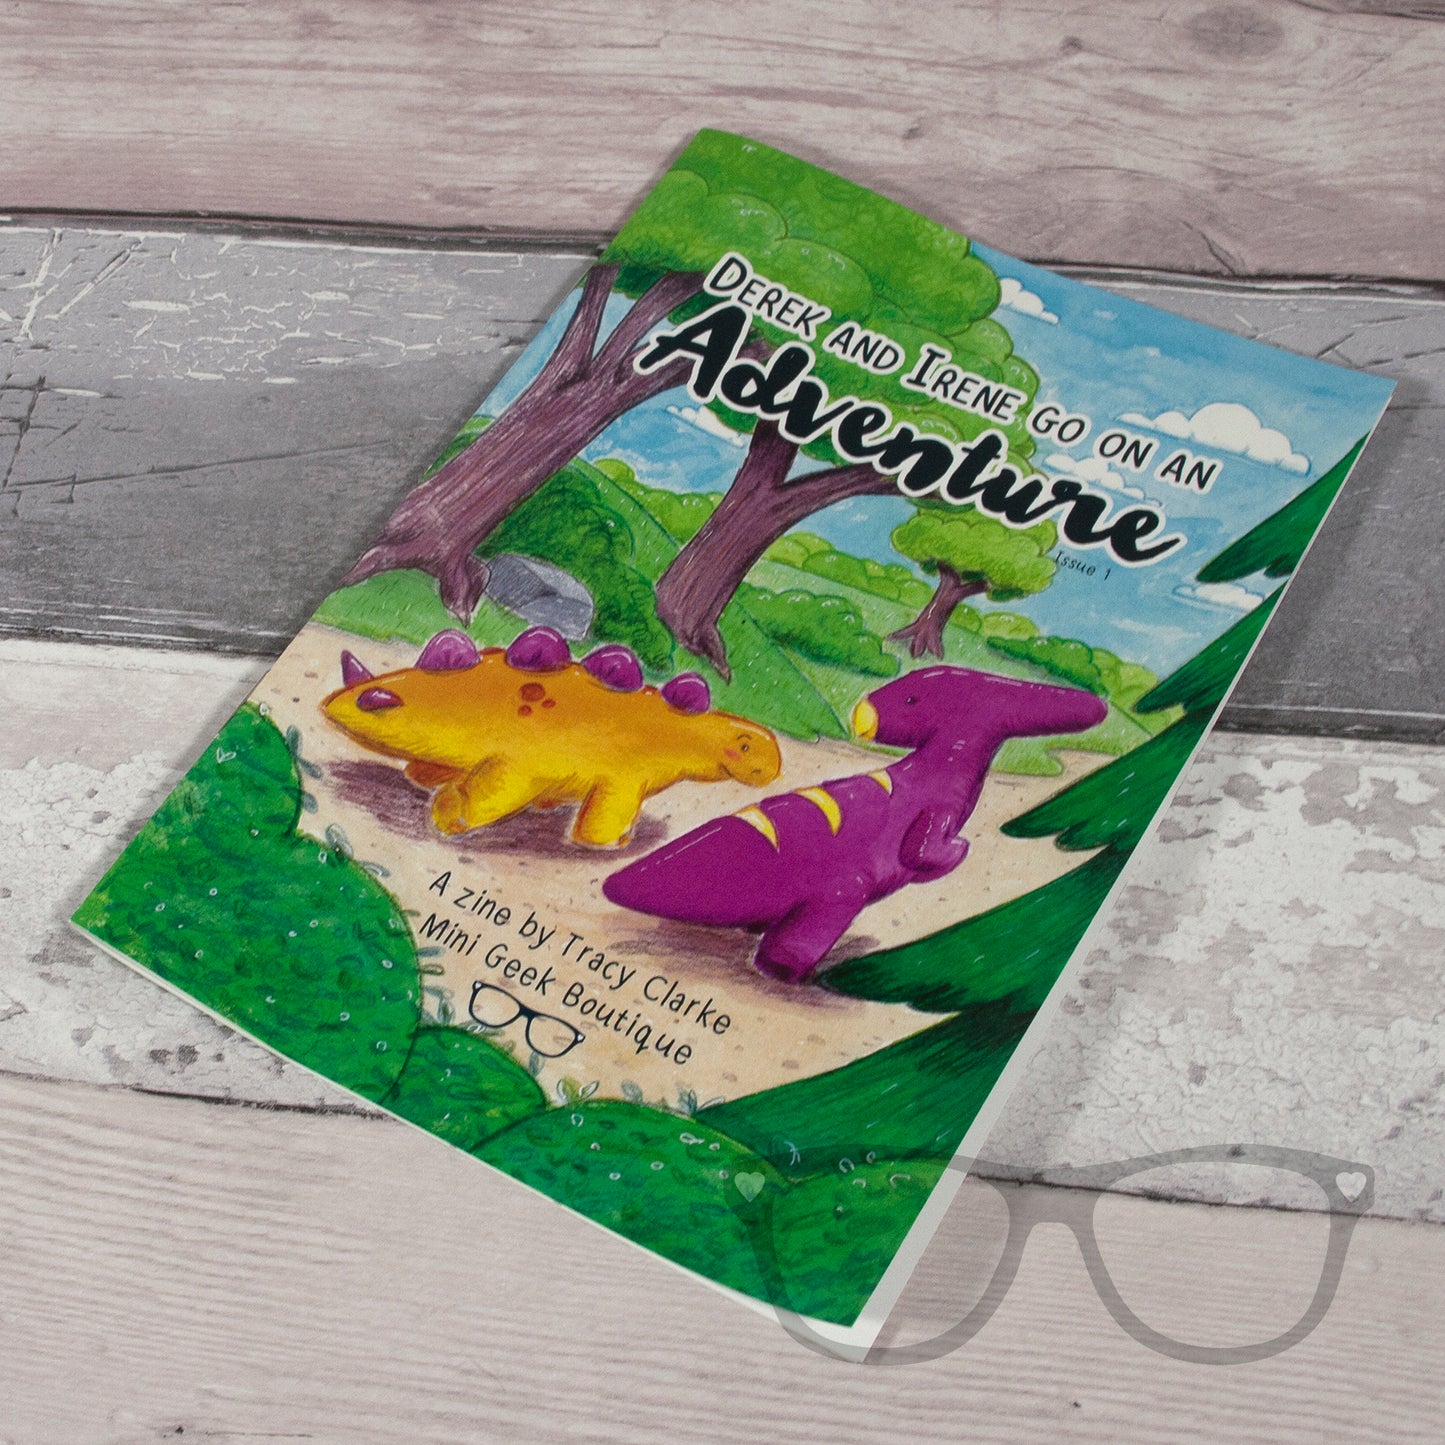 Let's go on an Adventure story zine Issue 1 - Mini Geek Boutique